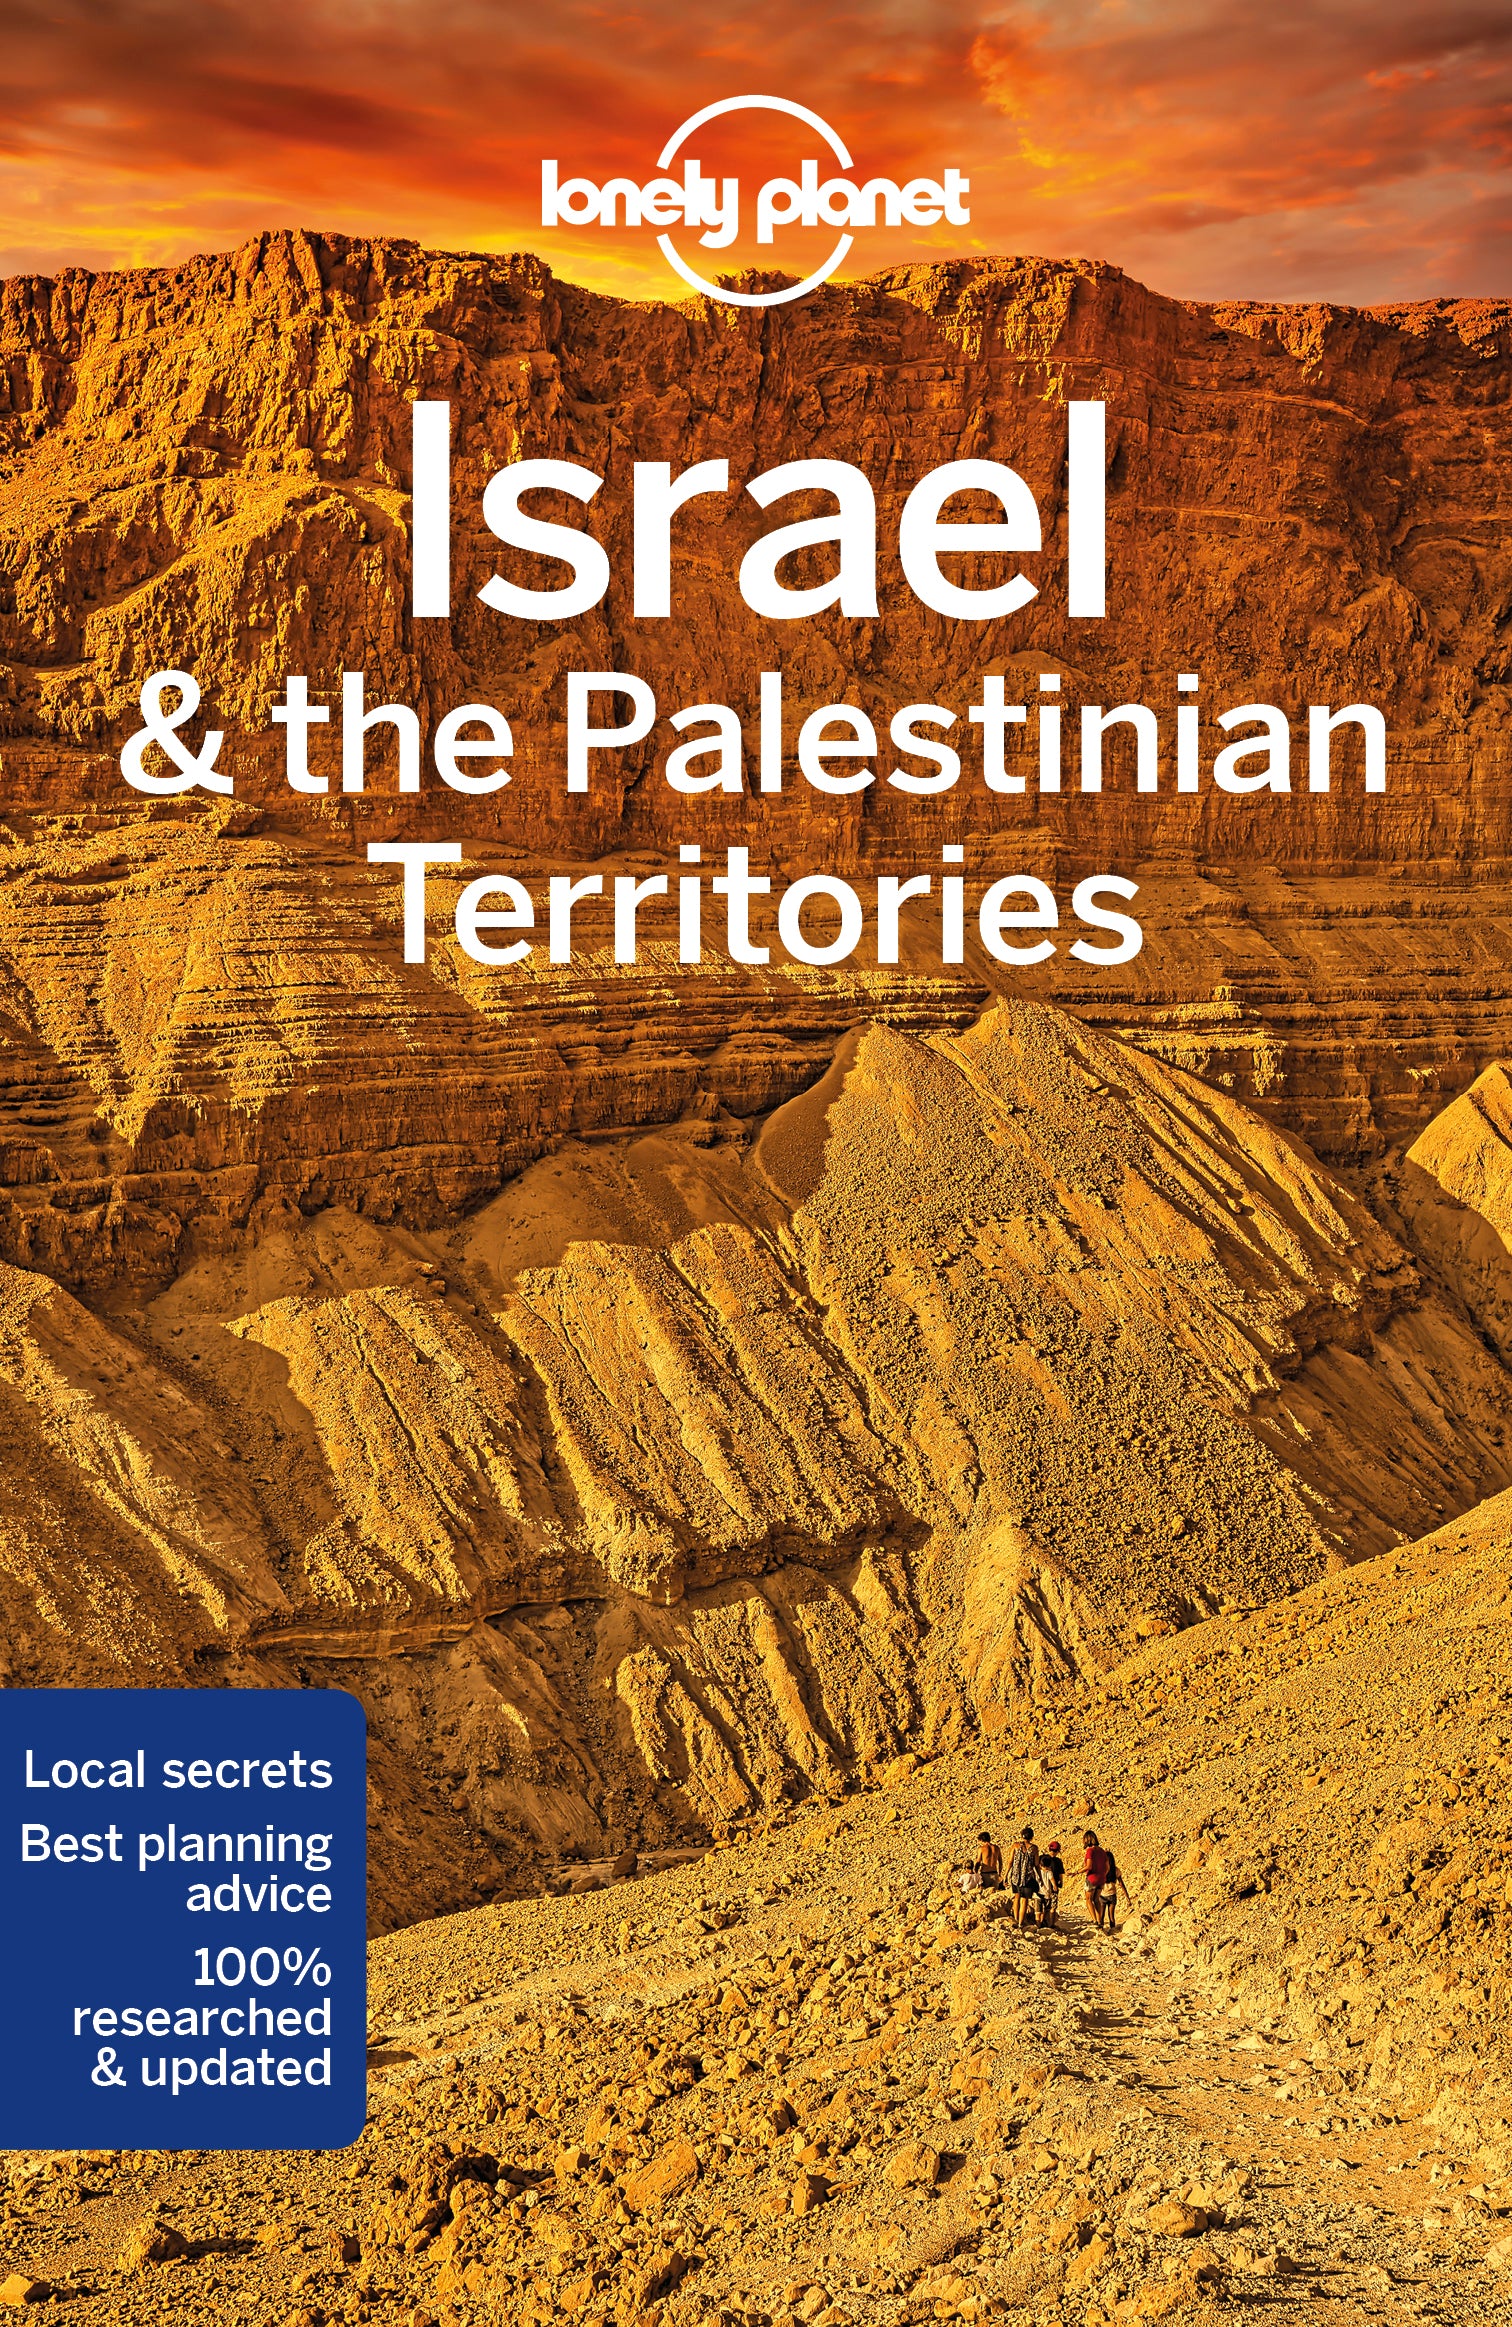 Lonely Planet Israel & the Palestinian Territories (10th Edition)